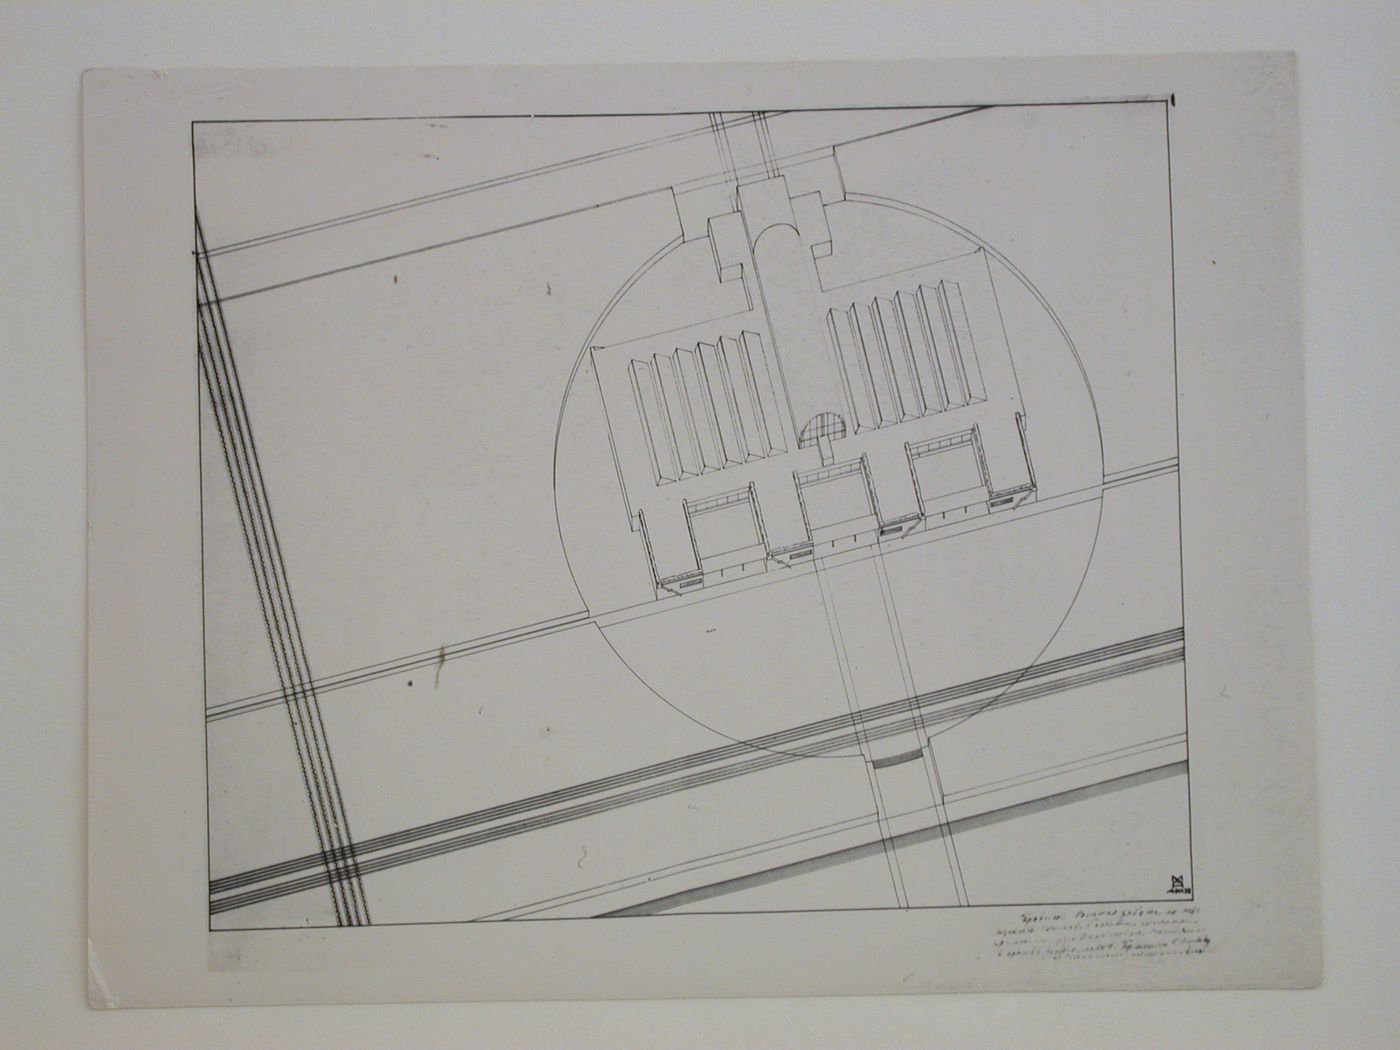 Photograph of a bird's-eye perspective drawing for an experimental design for a single-storey school, Soviet Union (now in Russia)